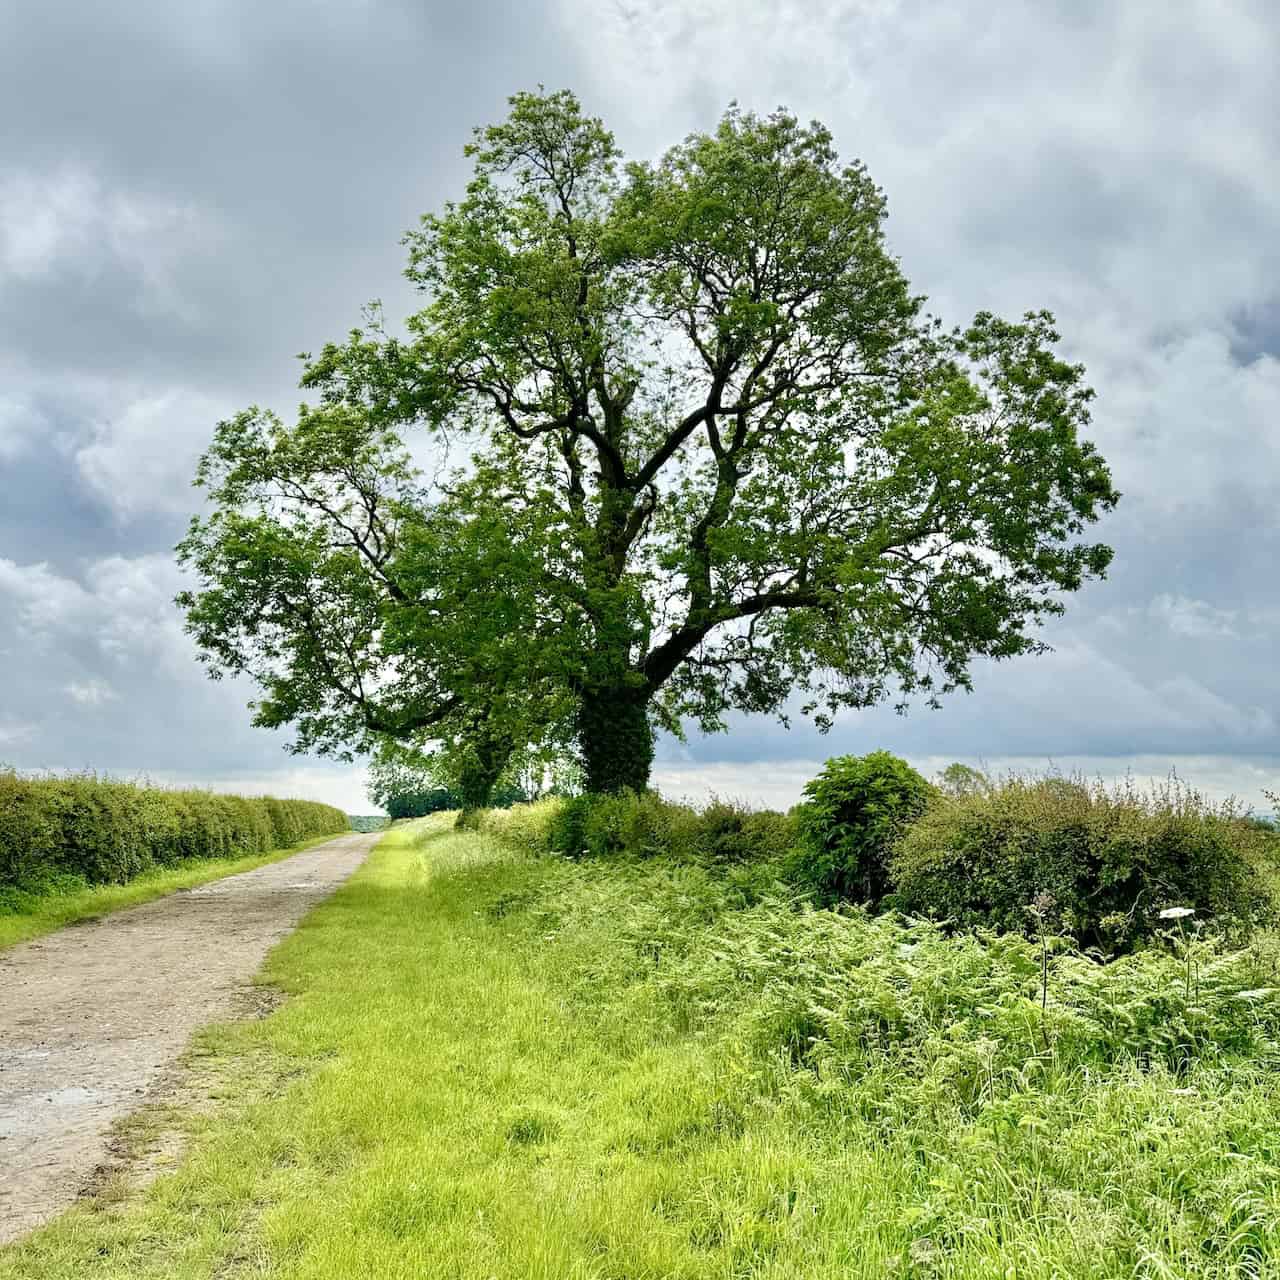 A tall, majestic ash tree marks the way on the side of Keld Lane, bordered on both sides by a hedgerow. The tree signifies the point about one-third of the way round this Helmsley circular walk.